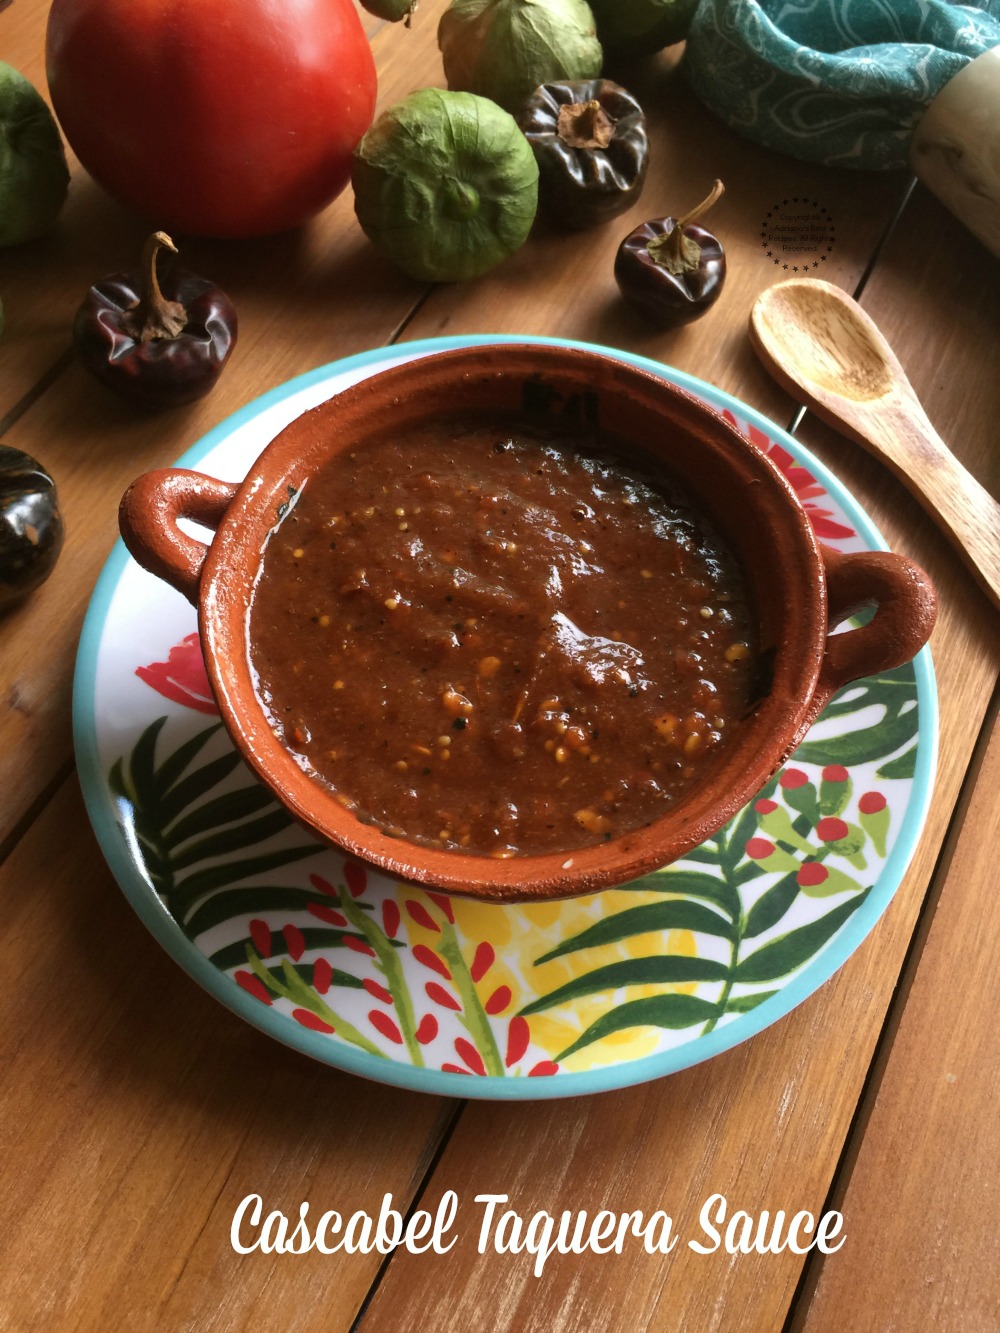 This cascabel taquera sauce is made with dried cascabel chiles, tomatillos, tomato, garlic, cumin and salt to taste